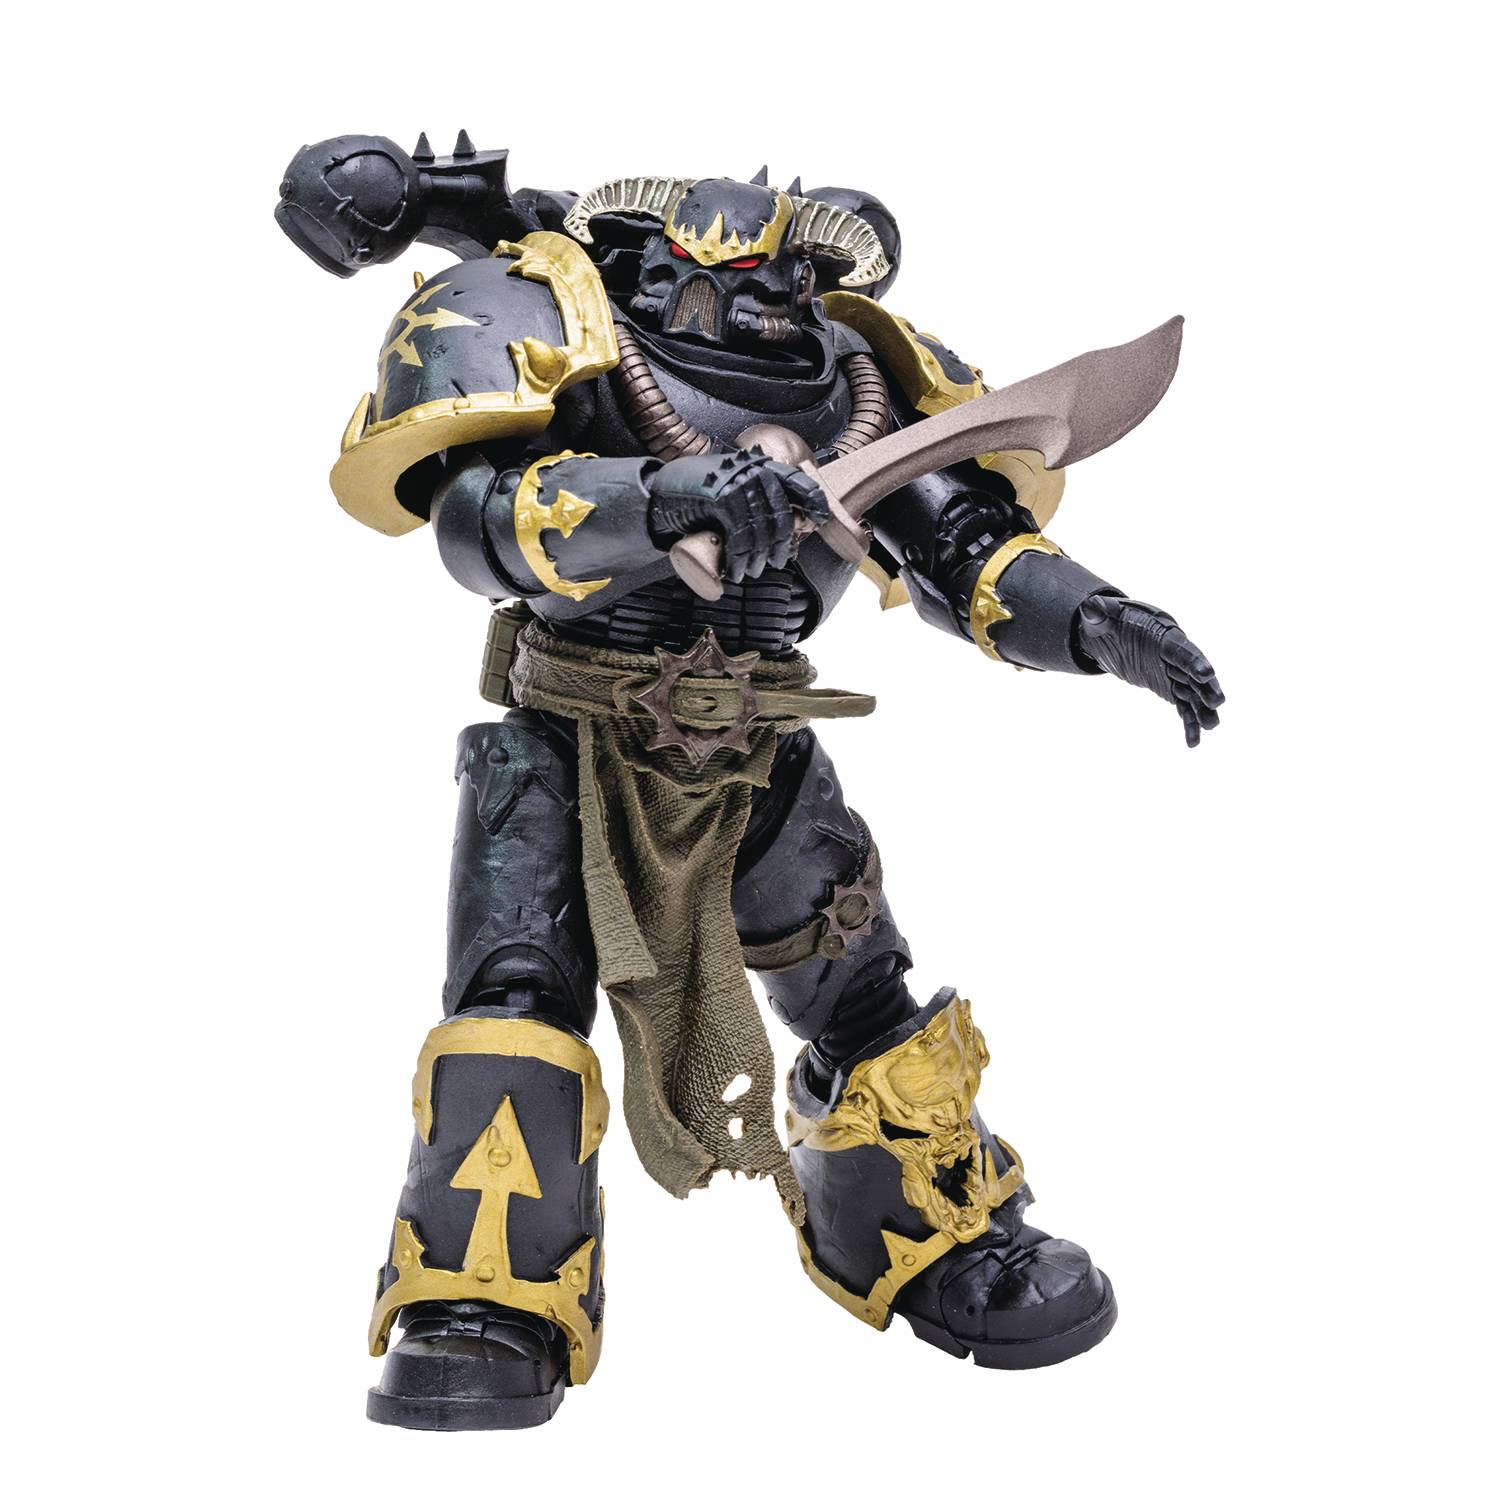 WARHAMMER 40K WV5 7IN SCALE ACTION FIGURE-CHAOS SPACE MARINE